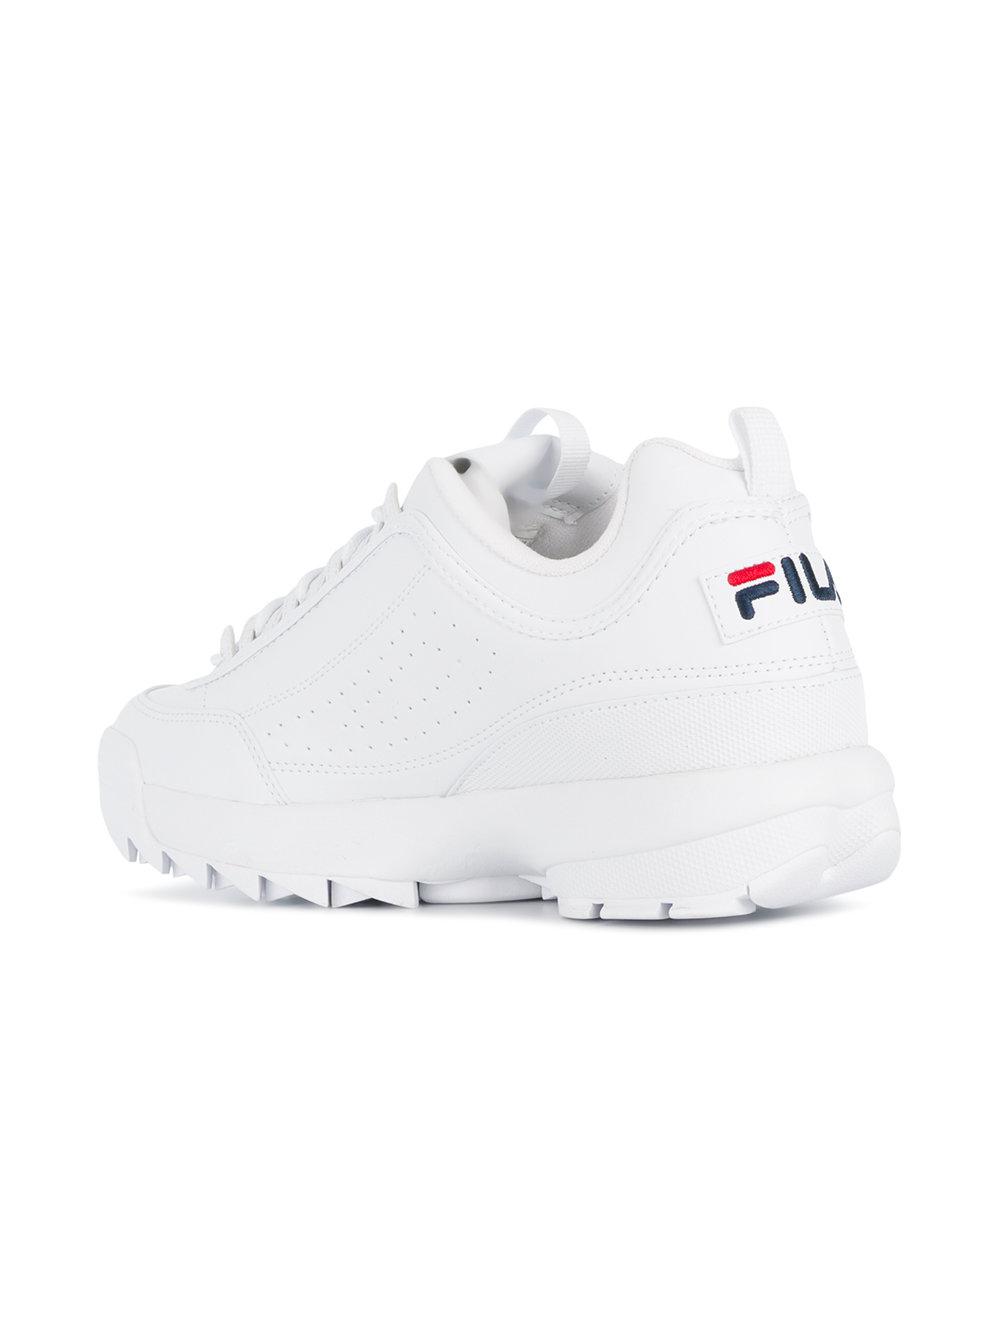 Fila Synthetic Chunky Sole Sneakers in White - Lyst